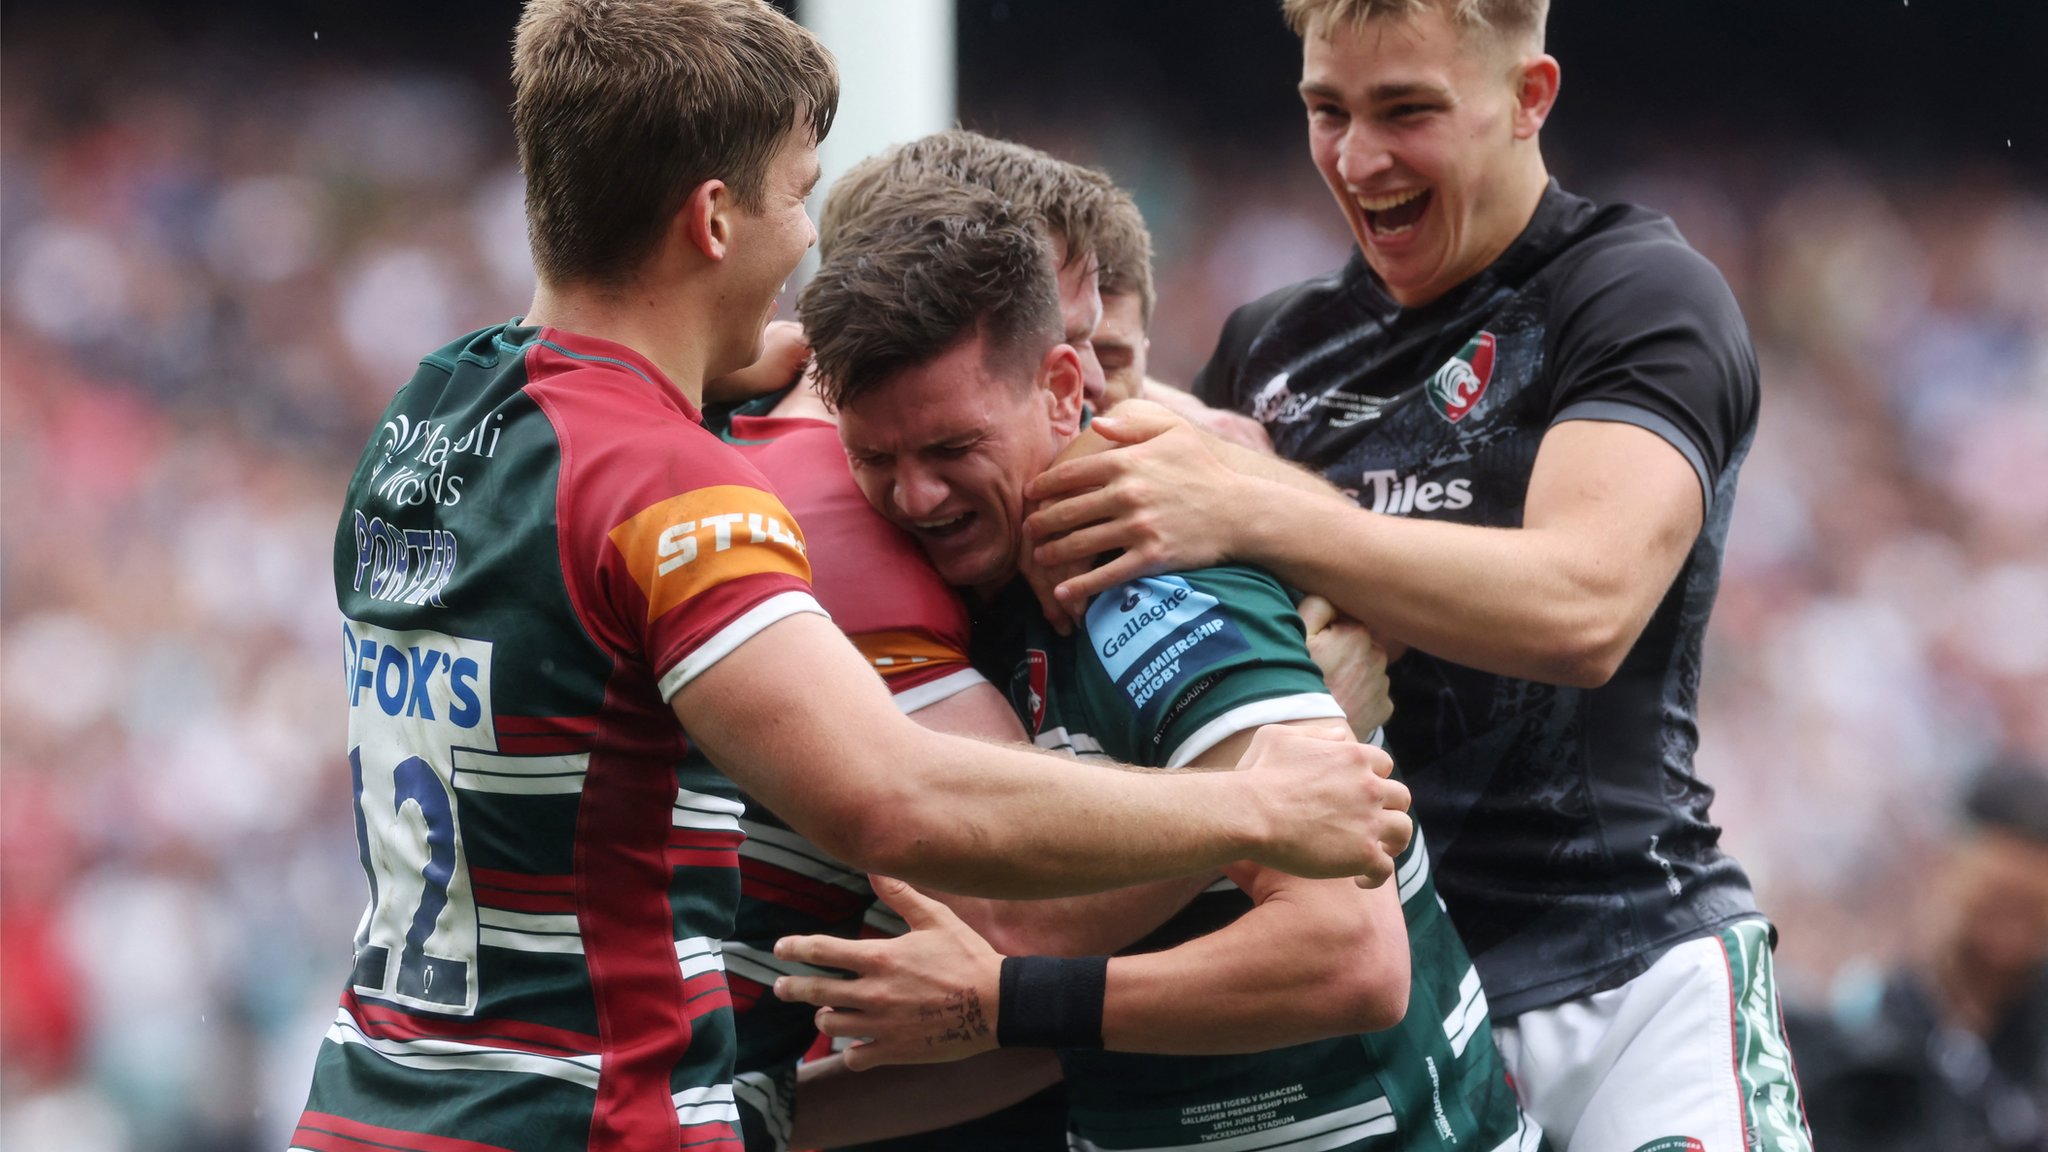 Premiership final Relive Leicesters dramatic win over Saracens - Live